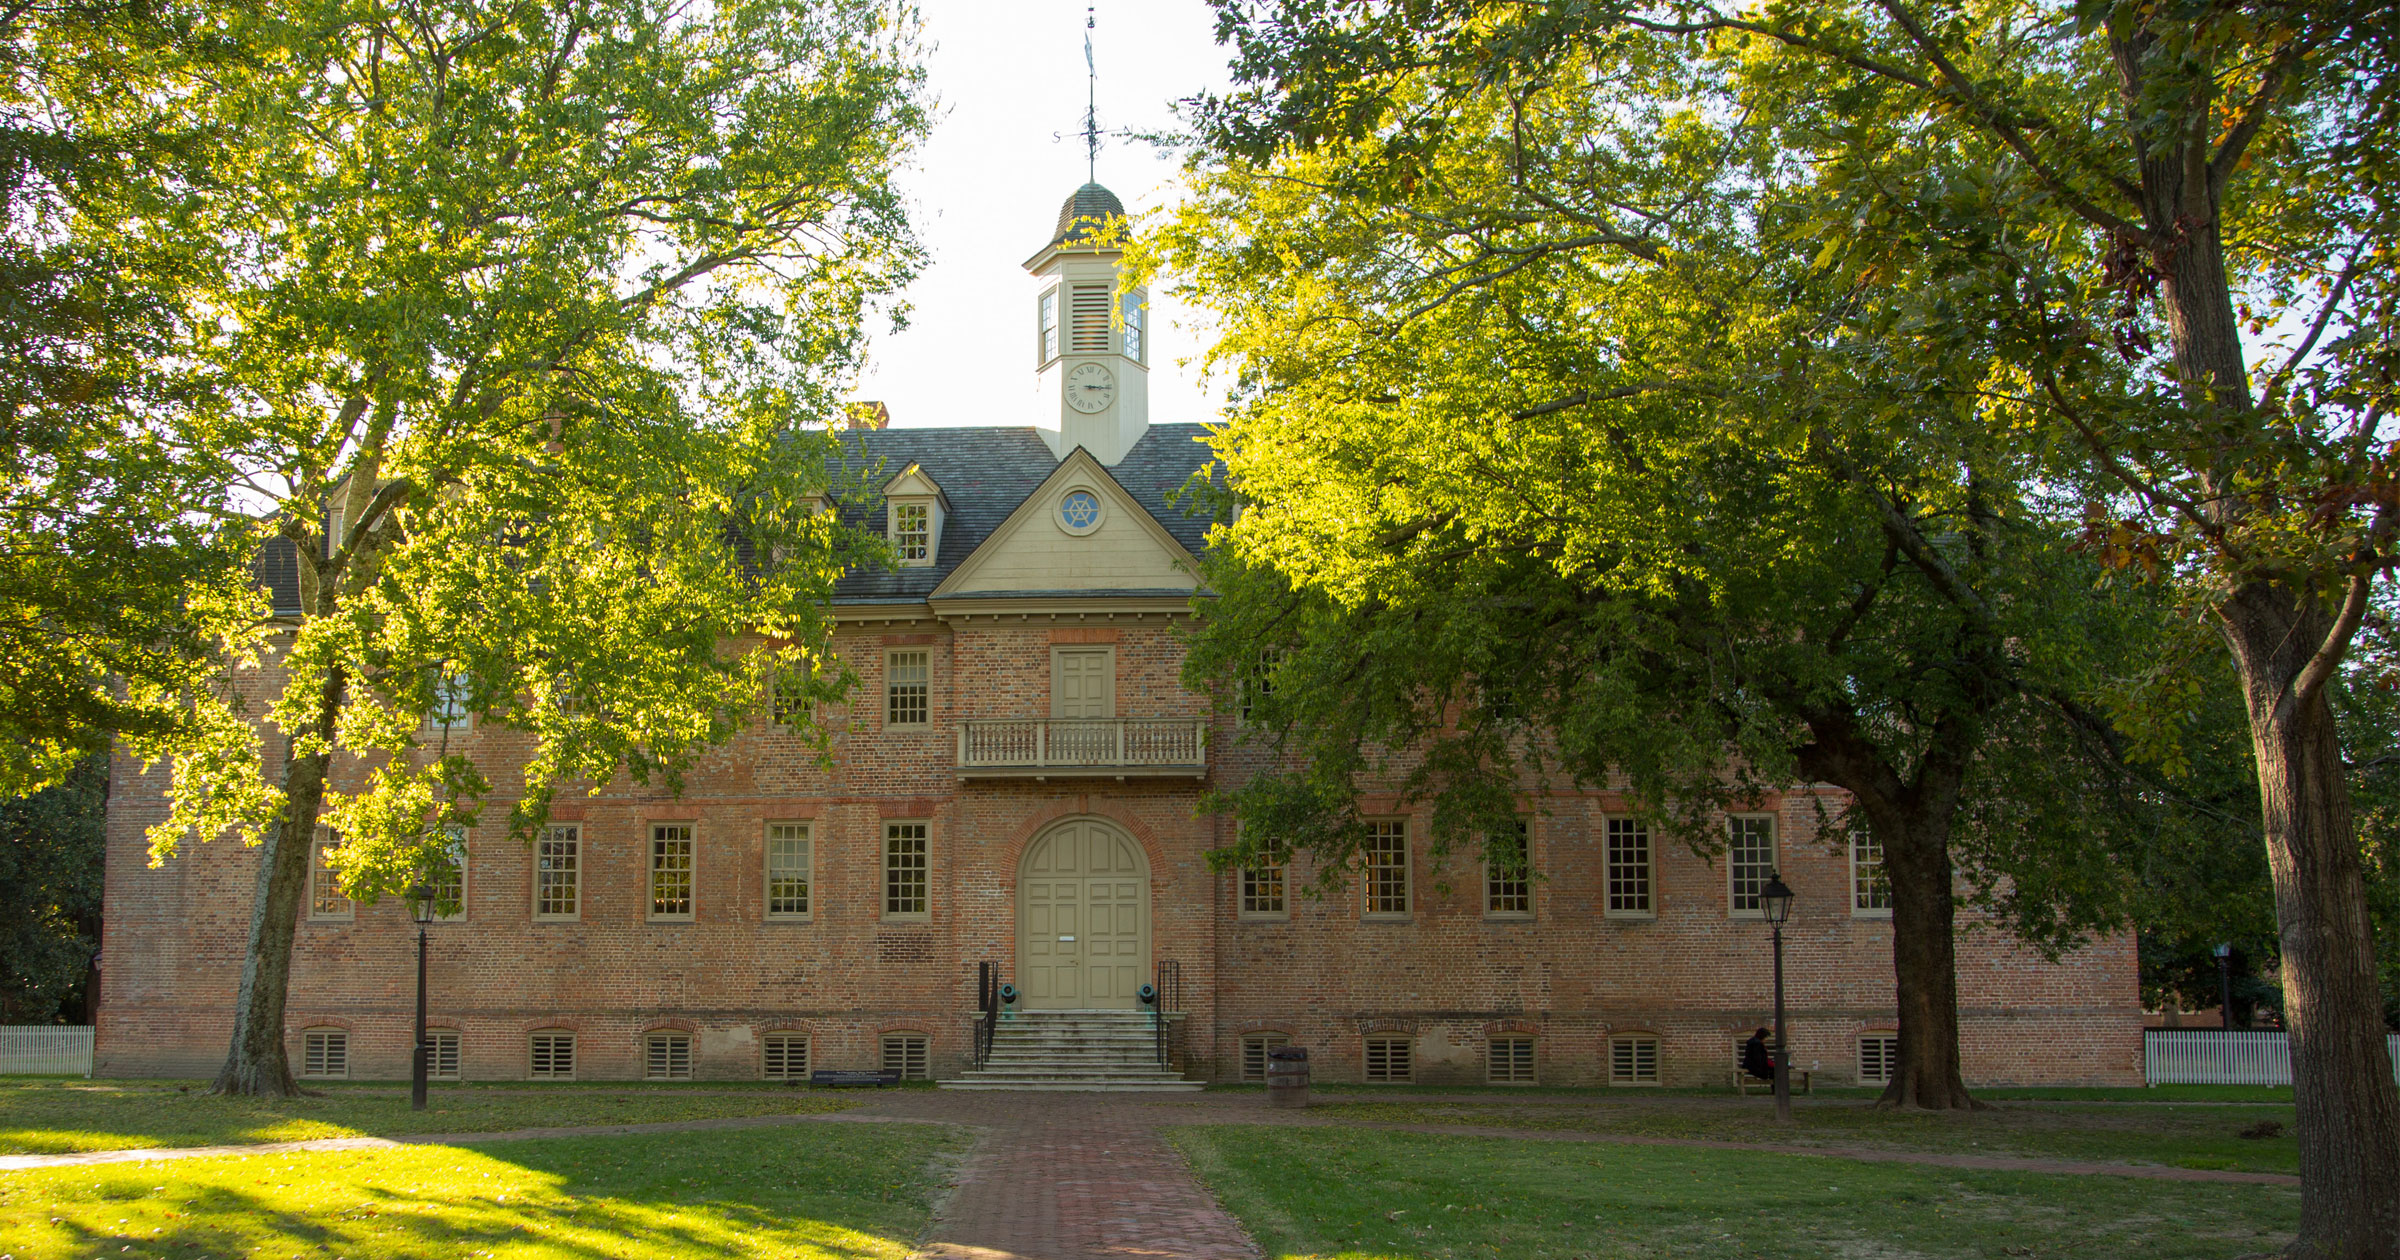 William & Mary raises $77M and is the No. 1 public in U.S. for alumni giving